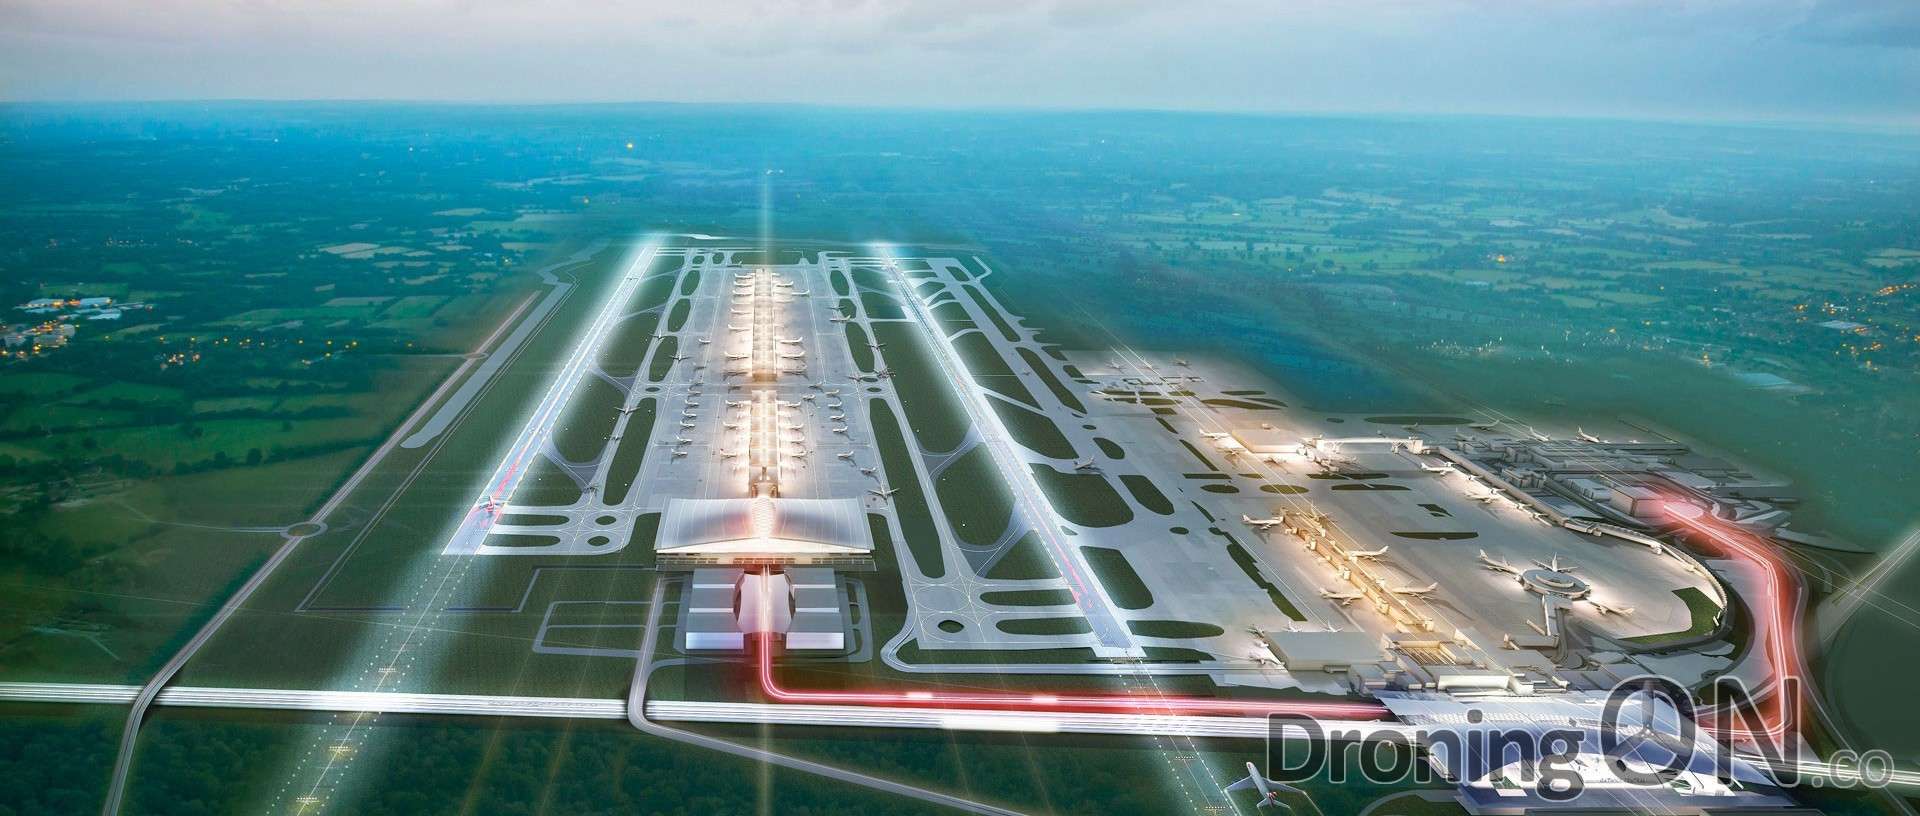 Gatwick Airport, the site of the drone scare this past week.